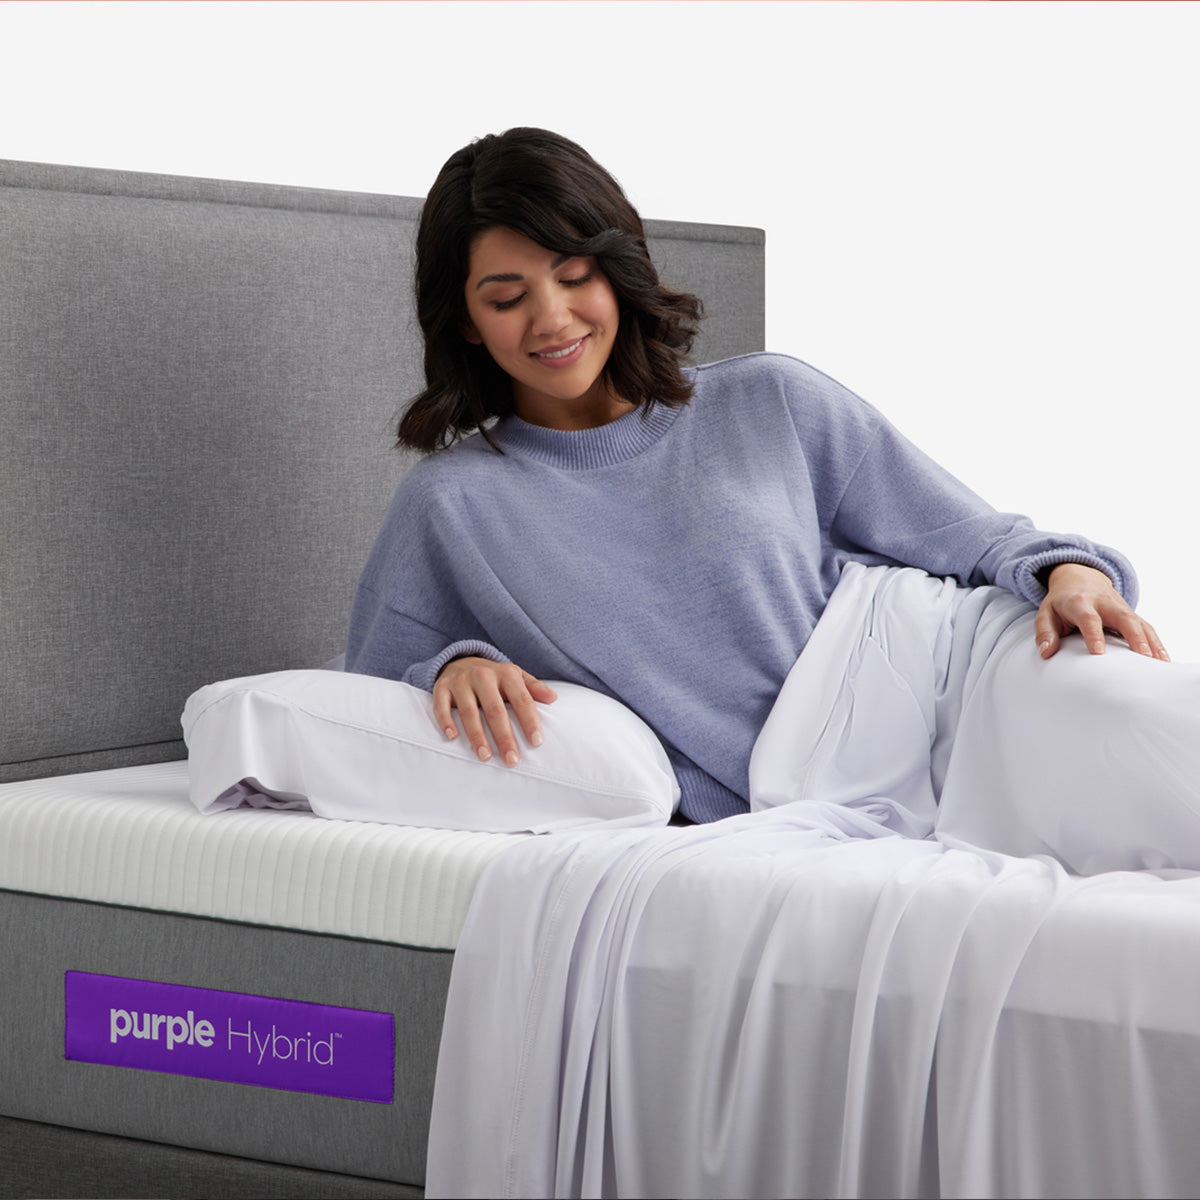 Woman Laying On Purple Hybrid Mattress And Pillow Covered With Purple SoftStretch Sheets